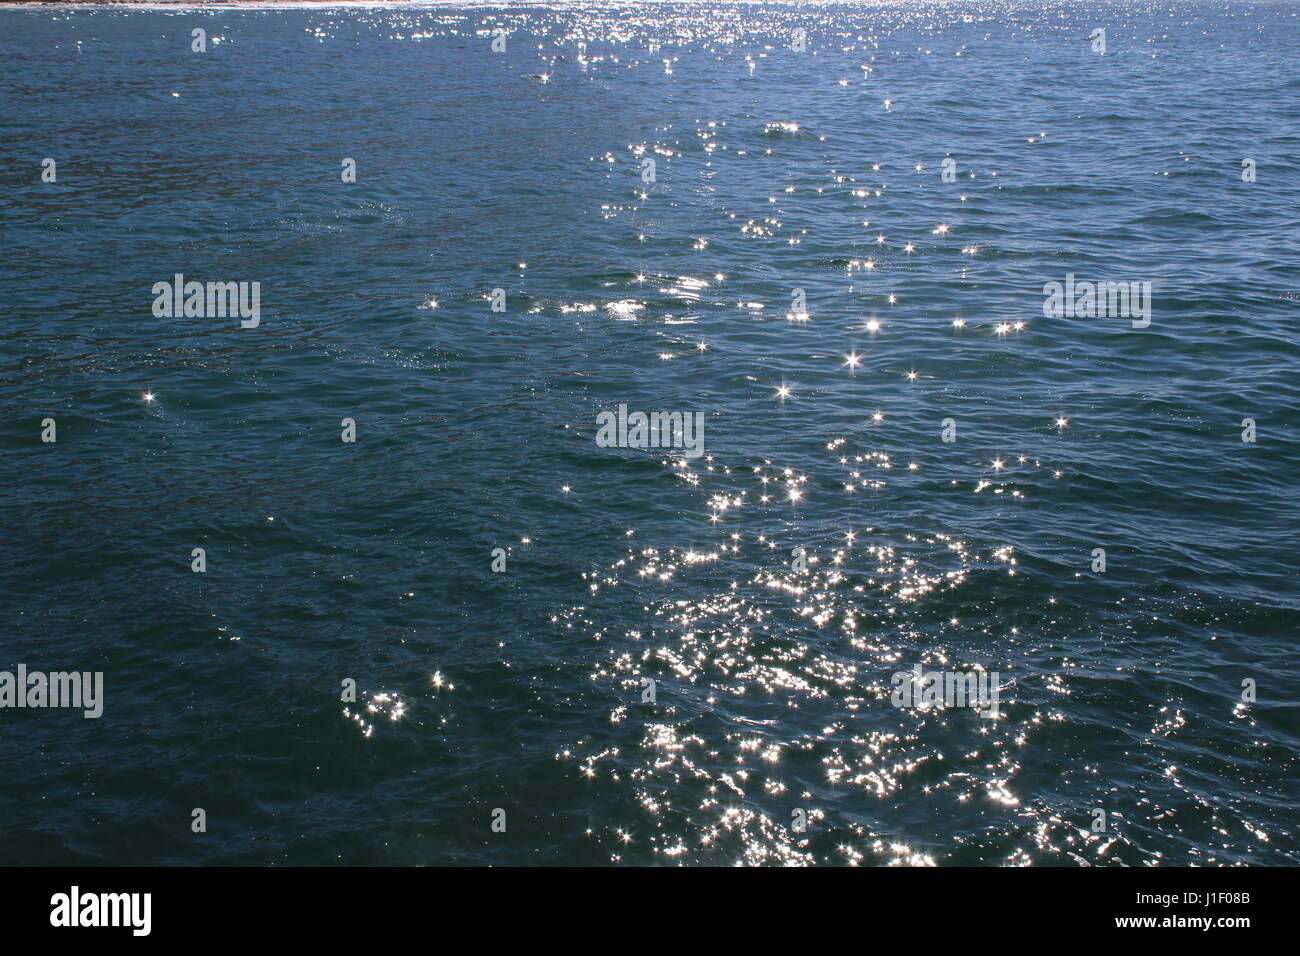 Sunlight on water, Kalk Bay harbour, Cape Town, South Africa Stock Photo